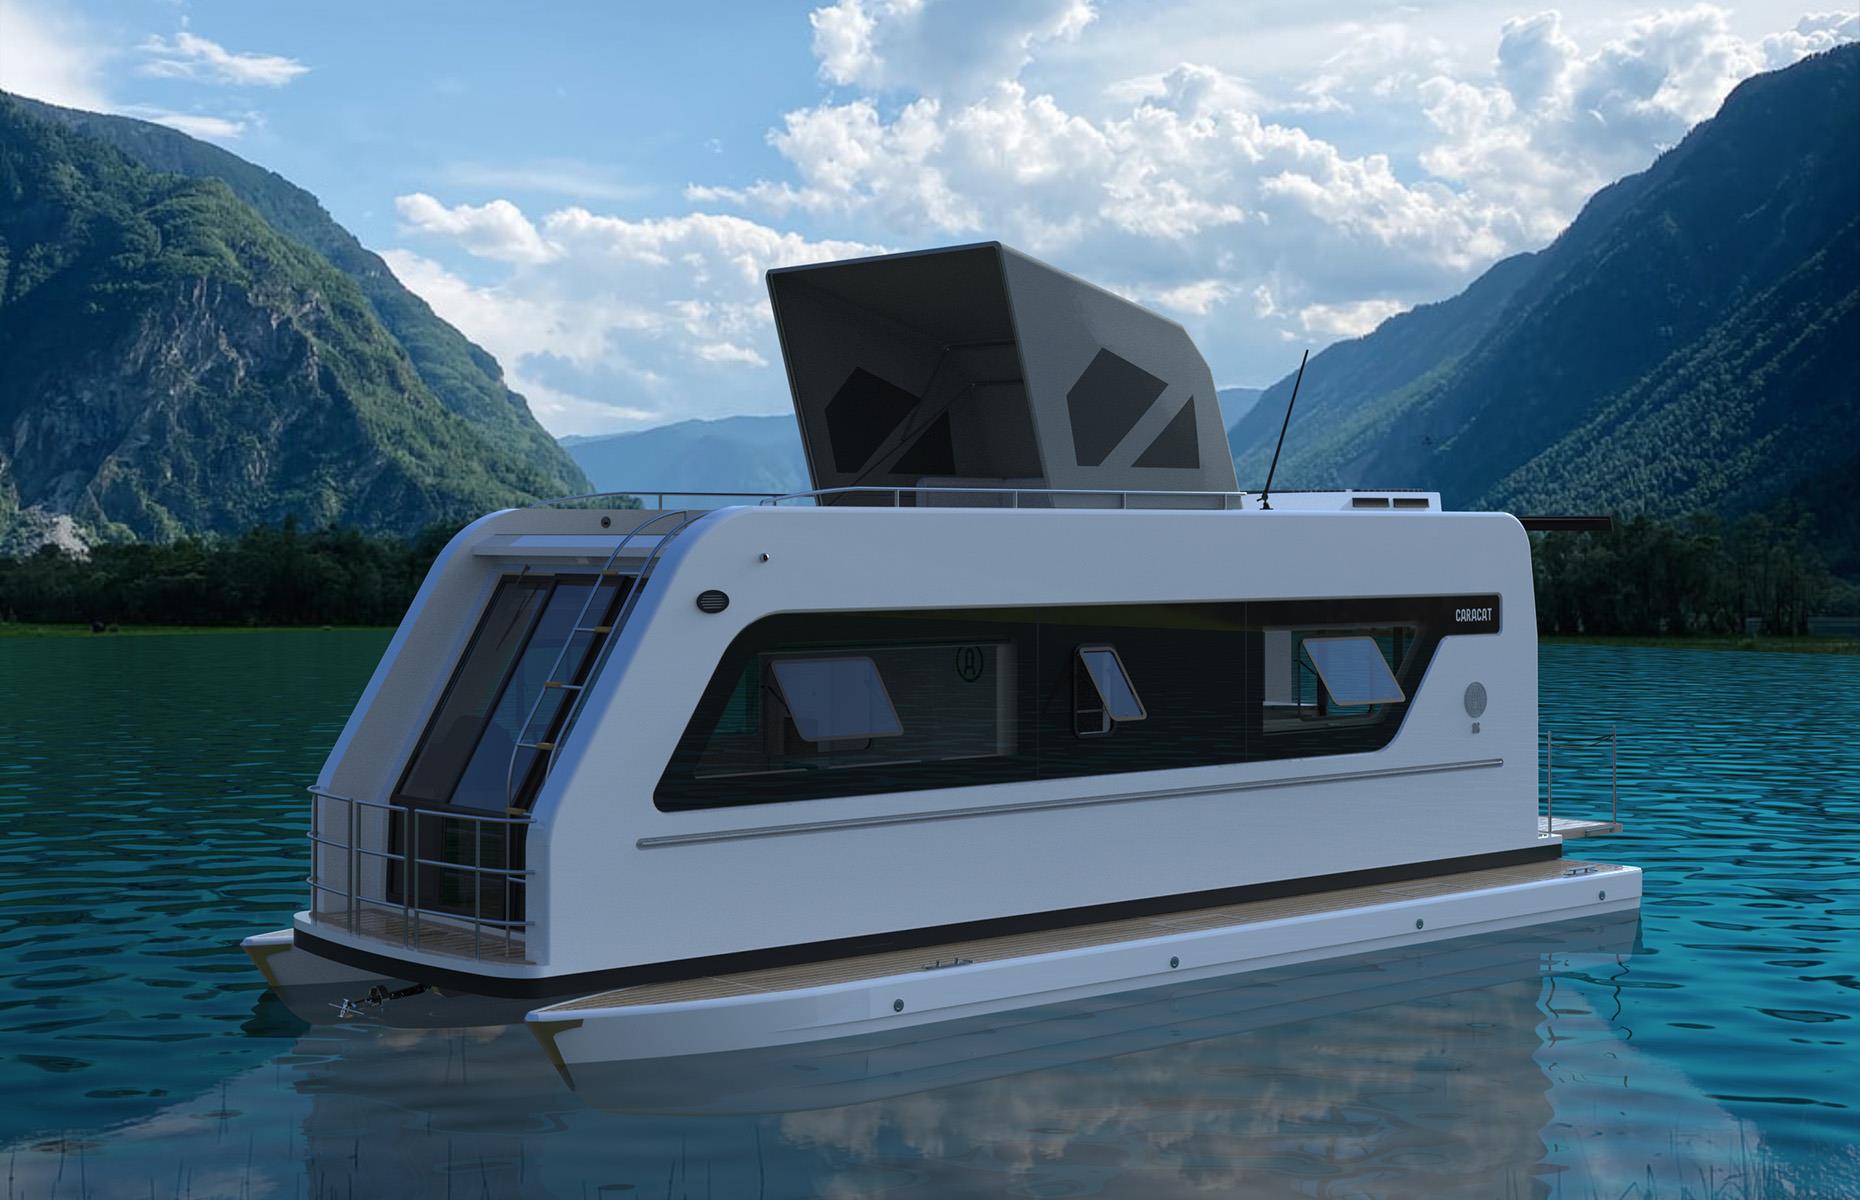 <p>Love camping but find the idea of being on land a bit limited? This is where a unique new vessel, the Caracat, comes in. A luxury caravan that transforms into a catamaran invites campers to stay on land or lake, and is available to order now from <a href="https://cara-cat.com/">Cara-Cat.com</a>. There are three models to choose from, starting at $129,000 and reaching $298,000, all fitted with a rechargeable electric motor. It'll need towed on land, of course, but once you take to the water, 'pontoons' extend outwards increasing the width of the Caracat for stability while cruising.</p>